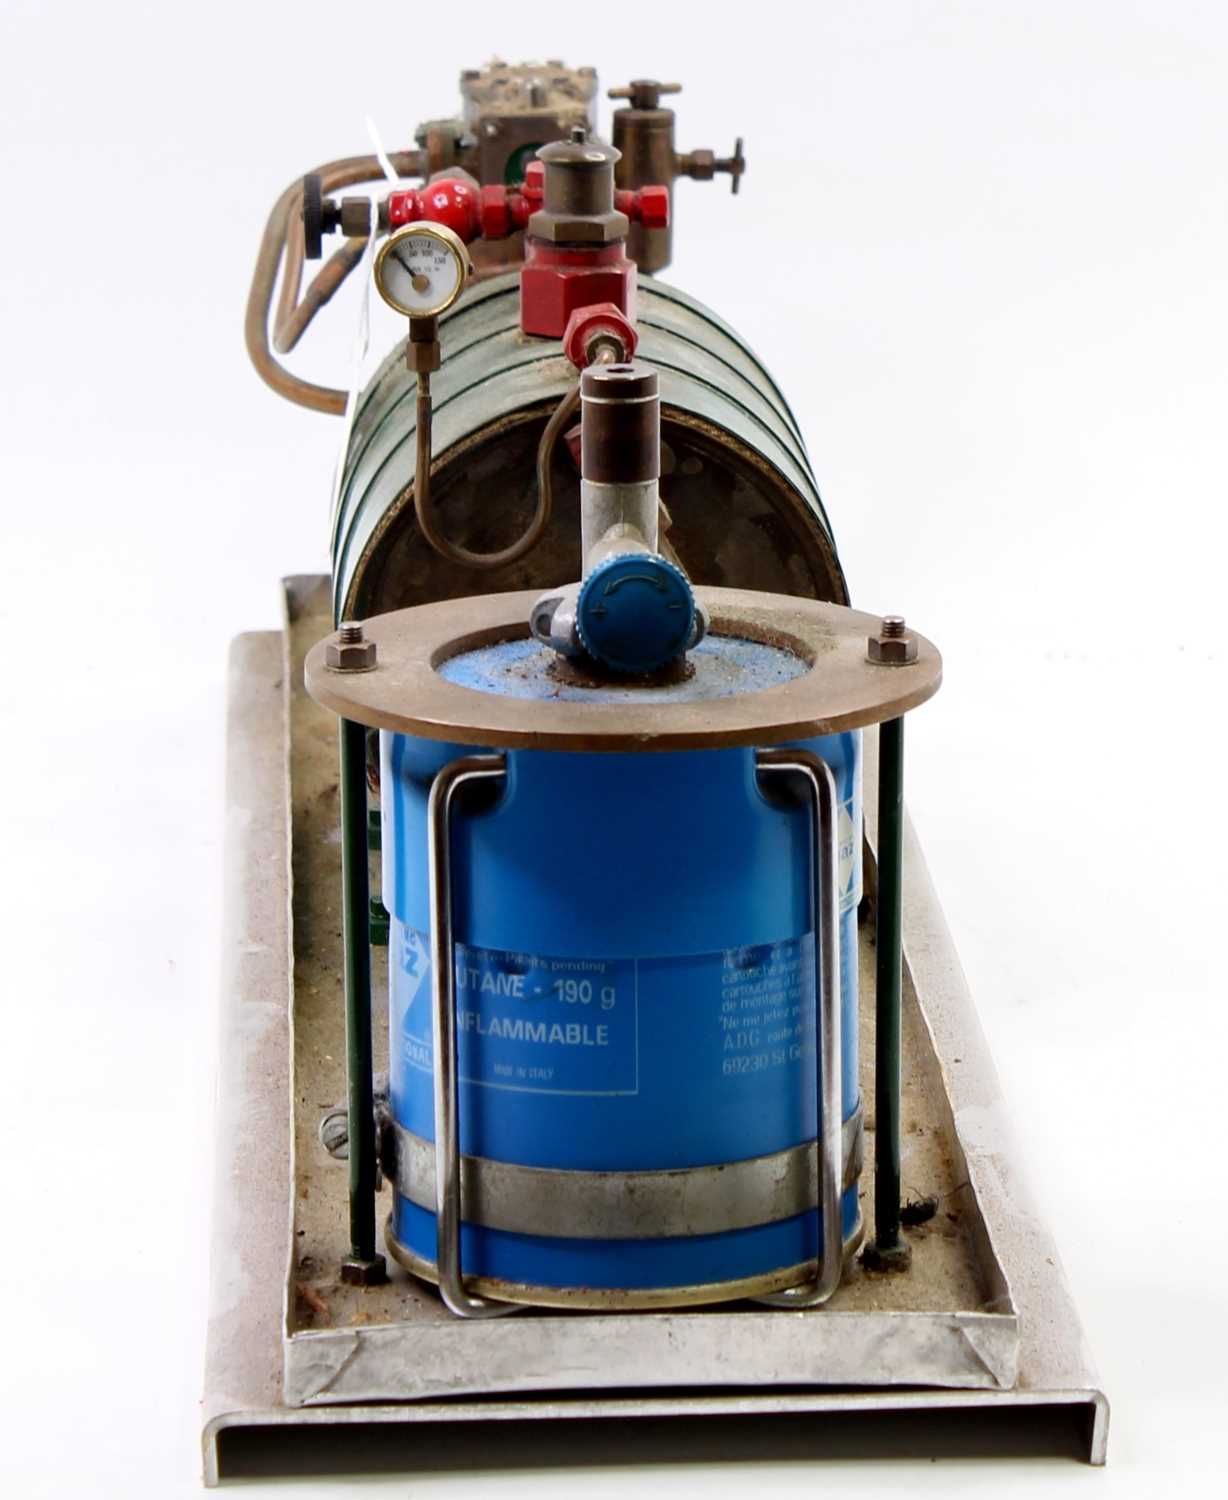 Scratchbuilt stationary steam plant comprising of the horizontal gas-fired boiler, powering a - Image 2 of 4